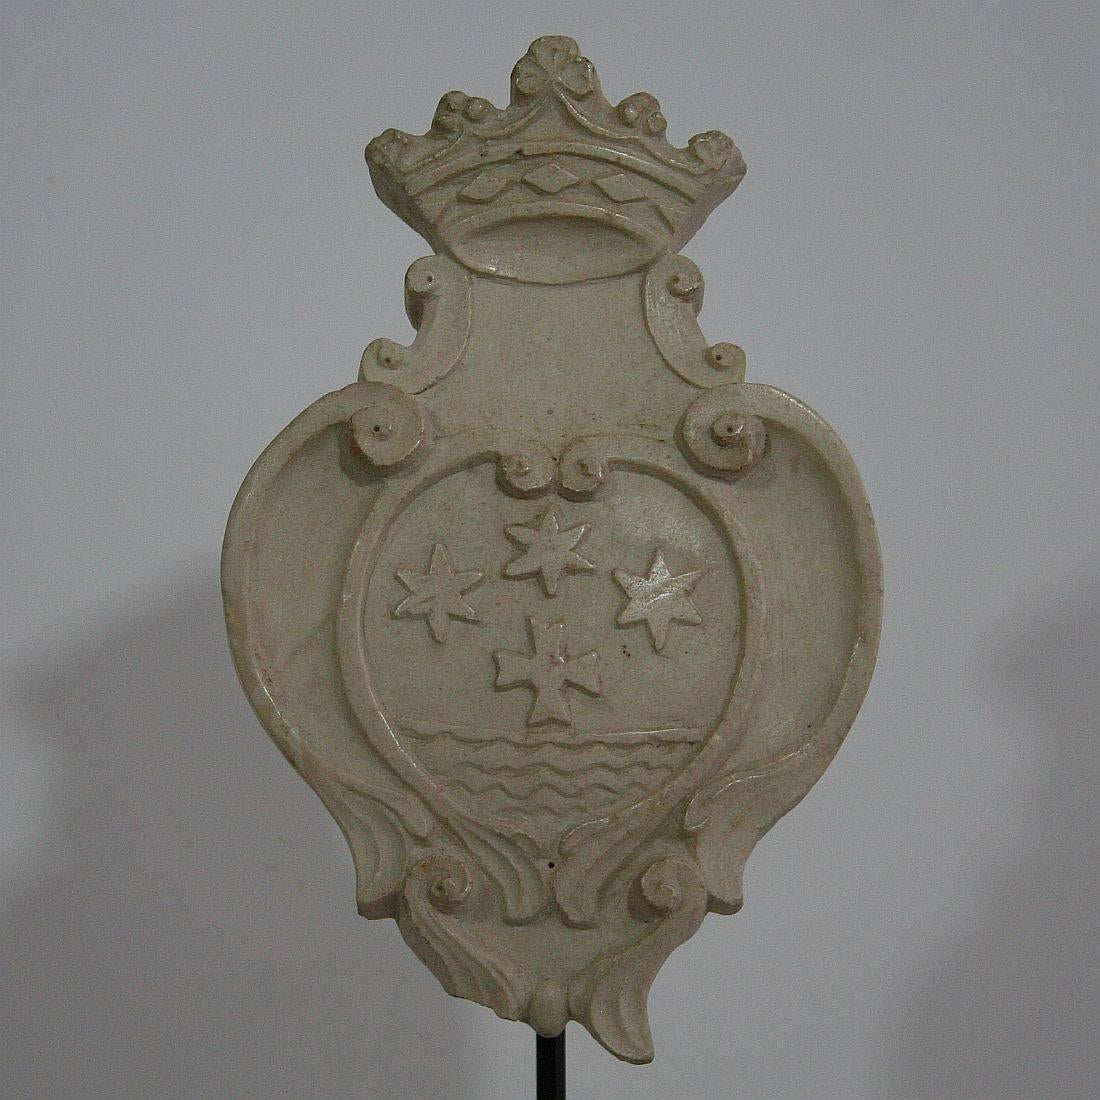 Very beautiful marble coat of arms. Great weathered patina
Italy, circa 1750. Weathered and small losses.
Measurement here below is inclusive the wooden base.